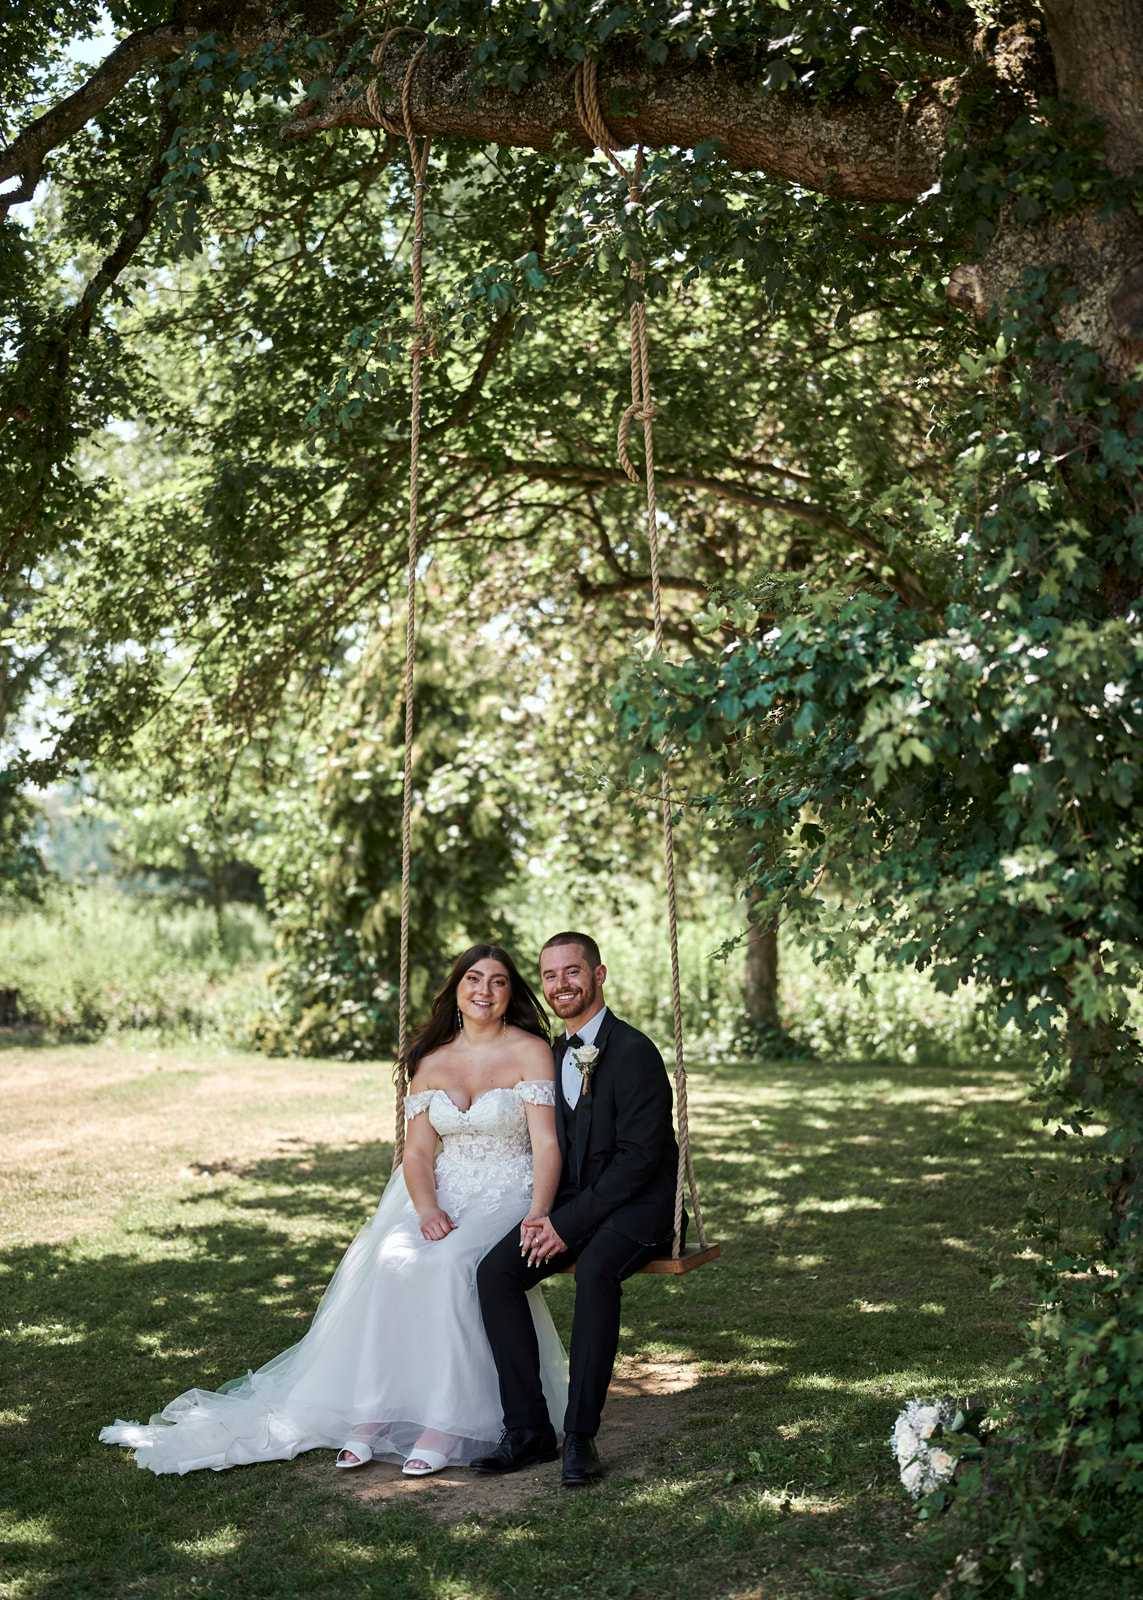 Newly Weds on Swing at Houchins Wedding Venue